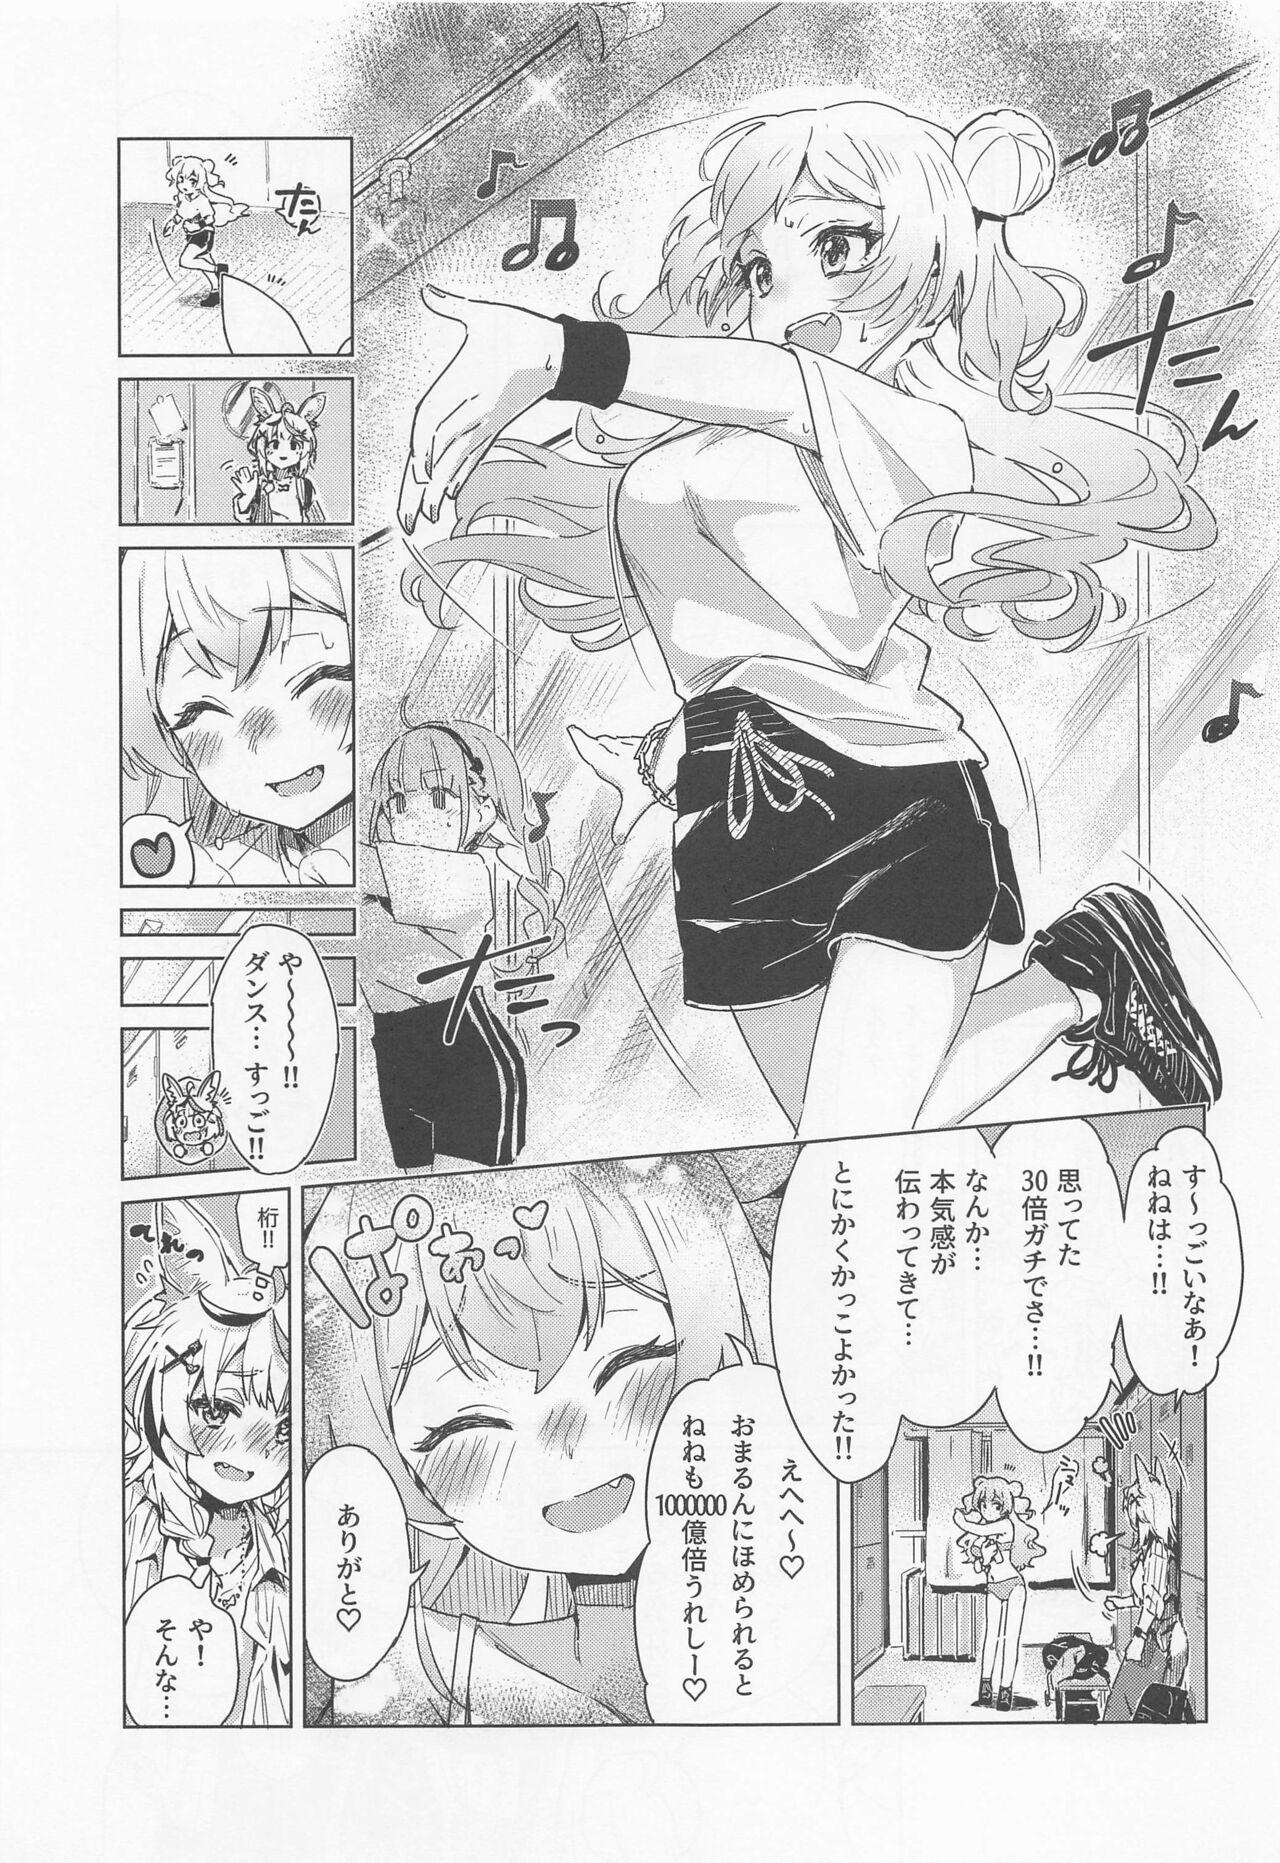 Blond Fennec wa Iseijin no Yume o Miru ka - Does The Fennec Dream of The Lovely Visitor? - Hololive Mamando - Page 6